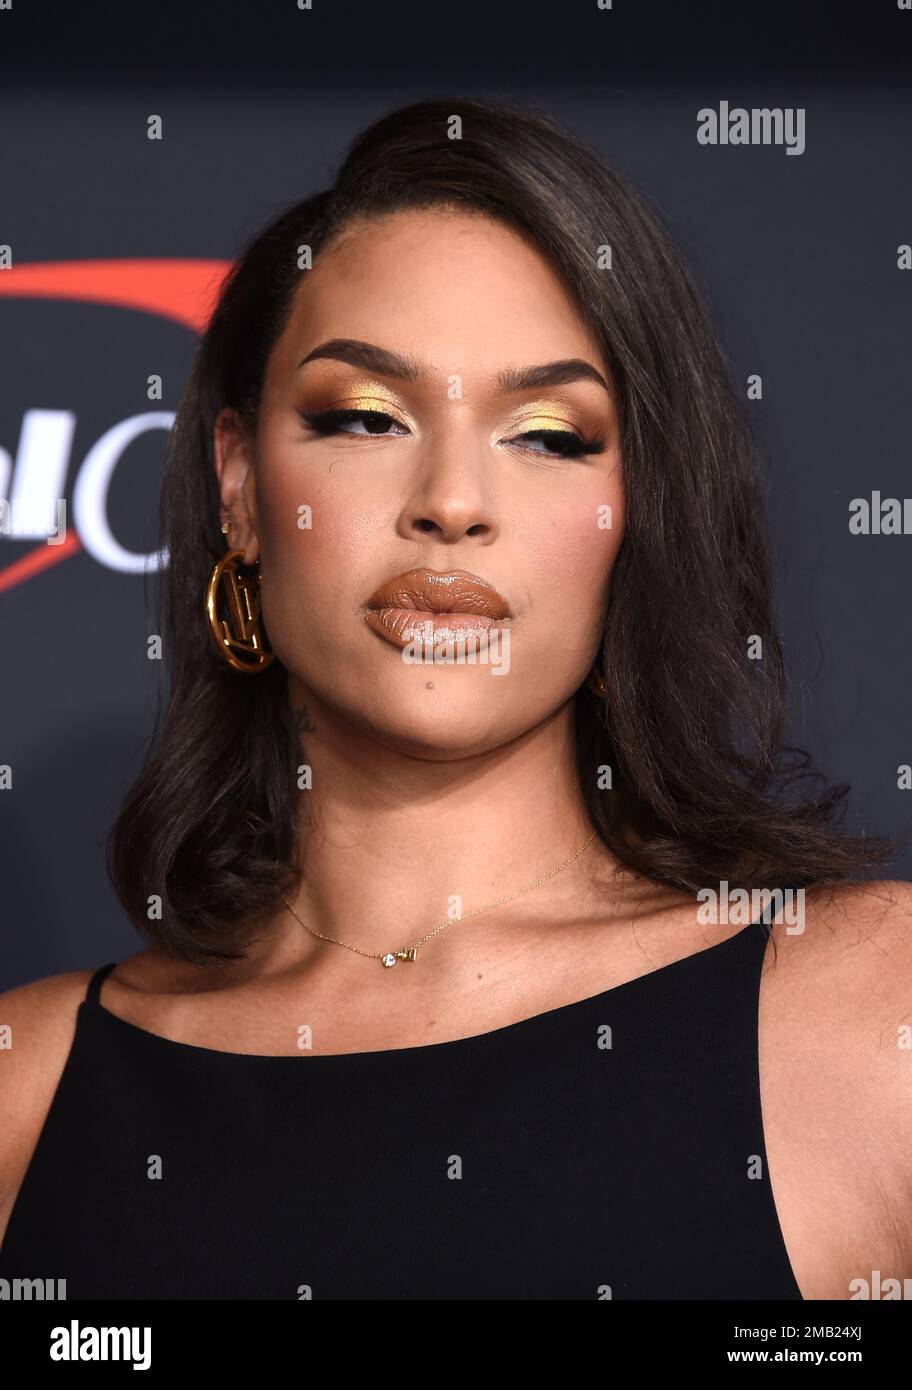 WNBA player Liz Cambage of the Los Angeles Sparks arrives at the ESPY Awards on Wednesday, July 20, 2022, at the Dolby Theatre in Los Angeles. (Photo by Jordan Strauss/Invision/AP) Stock Photo